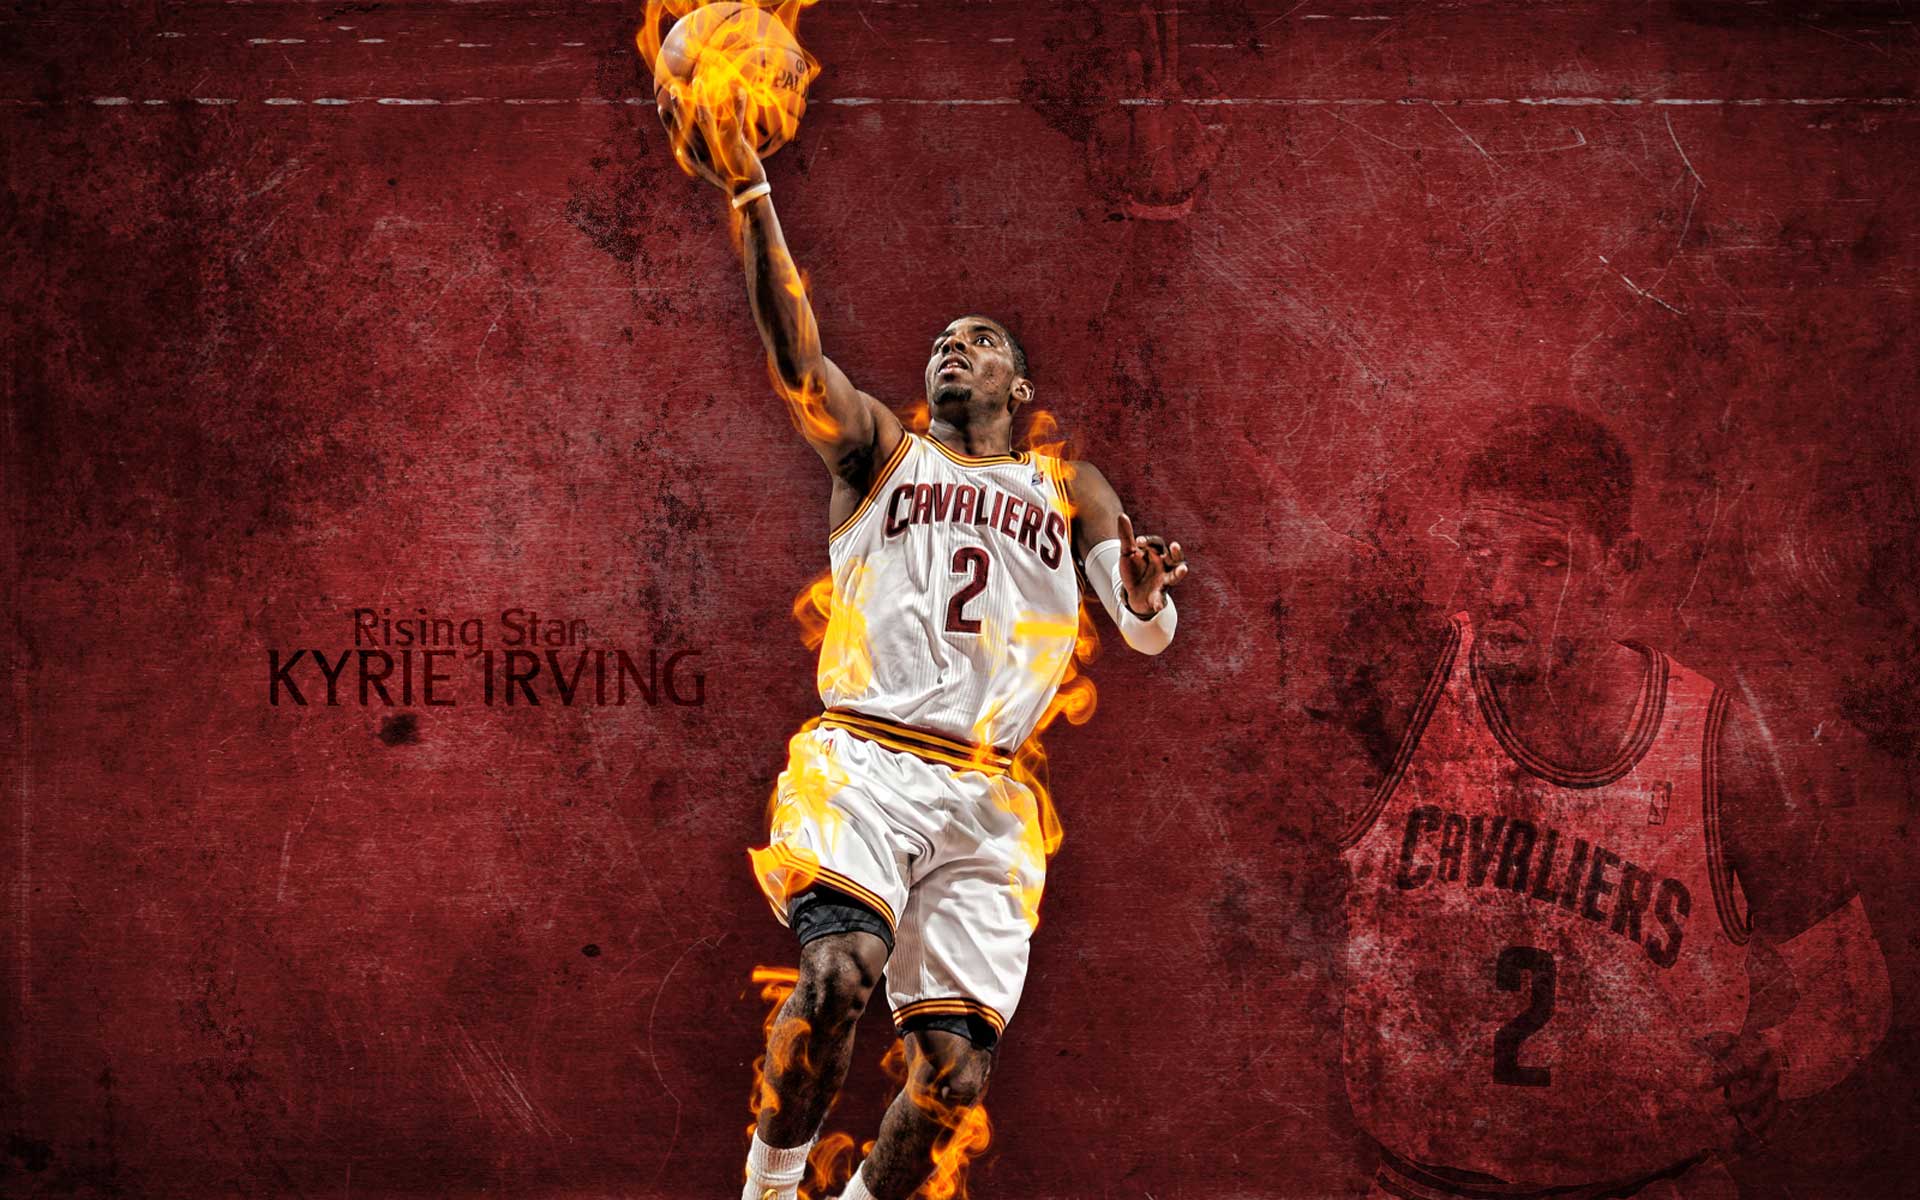 kyrie irving cool wallpaper,basketball player,yellow,lacrosse,stick and ball sports,player